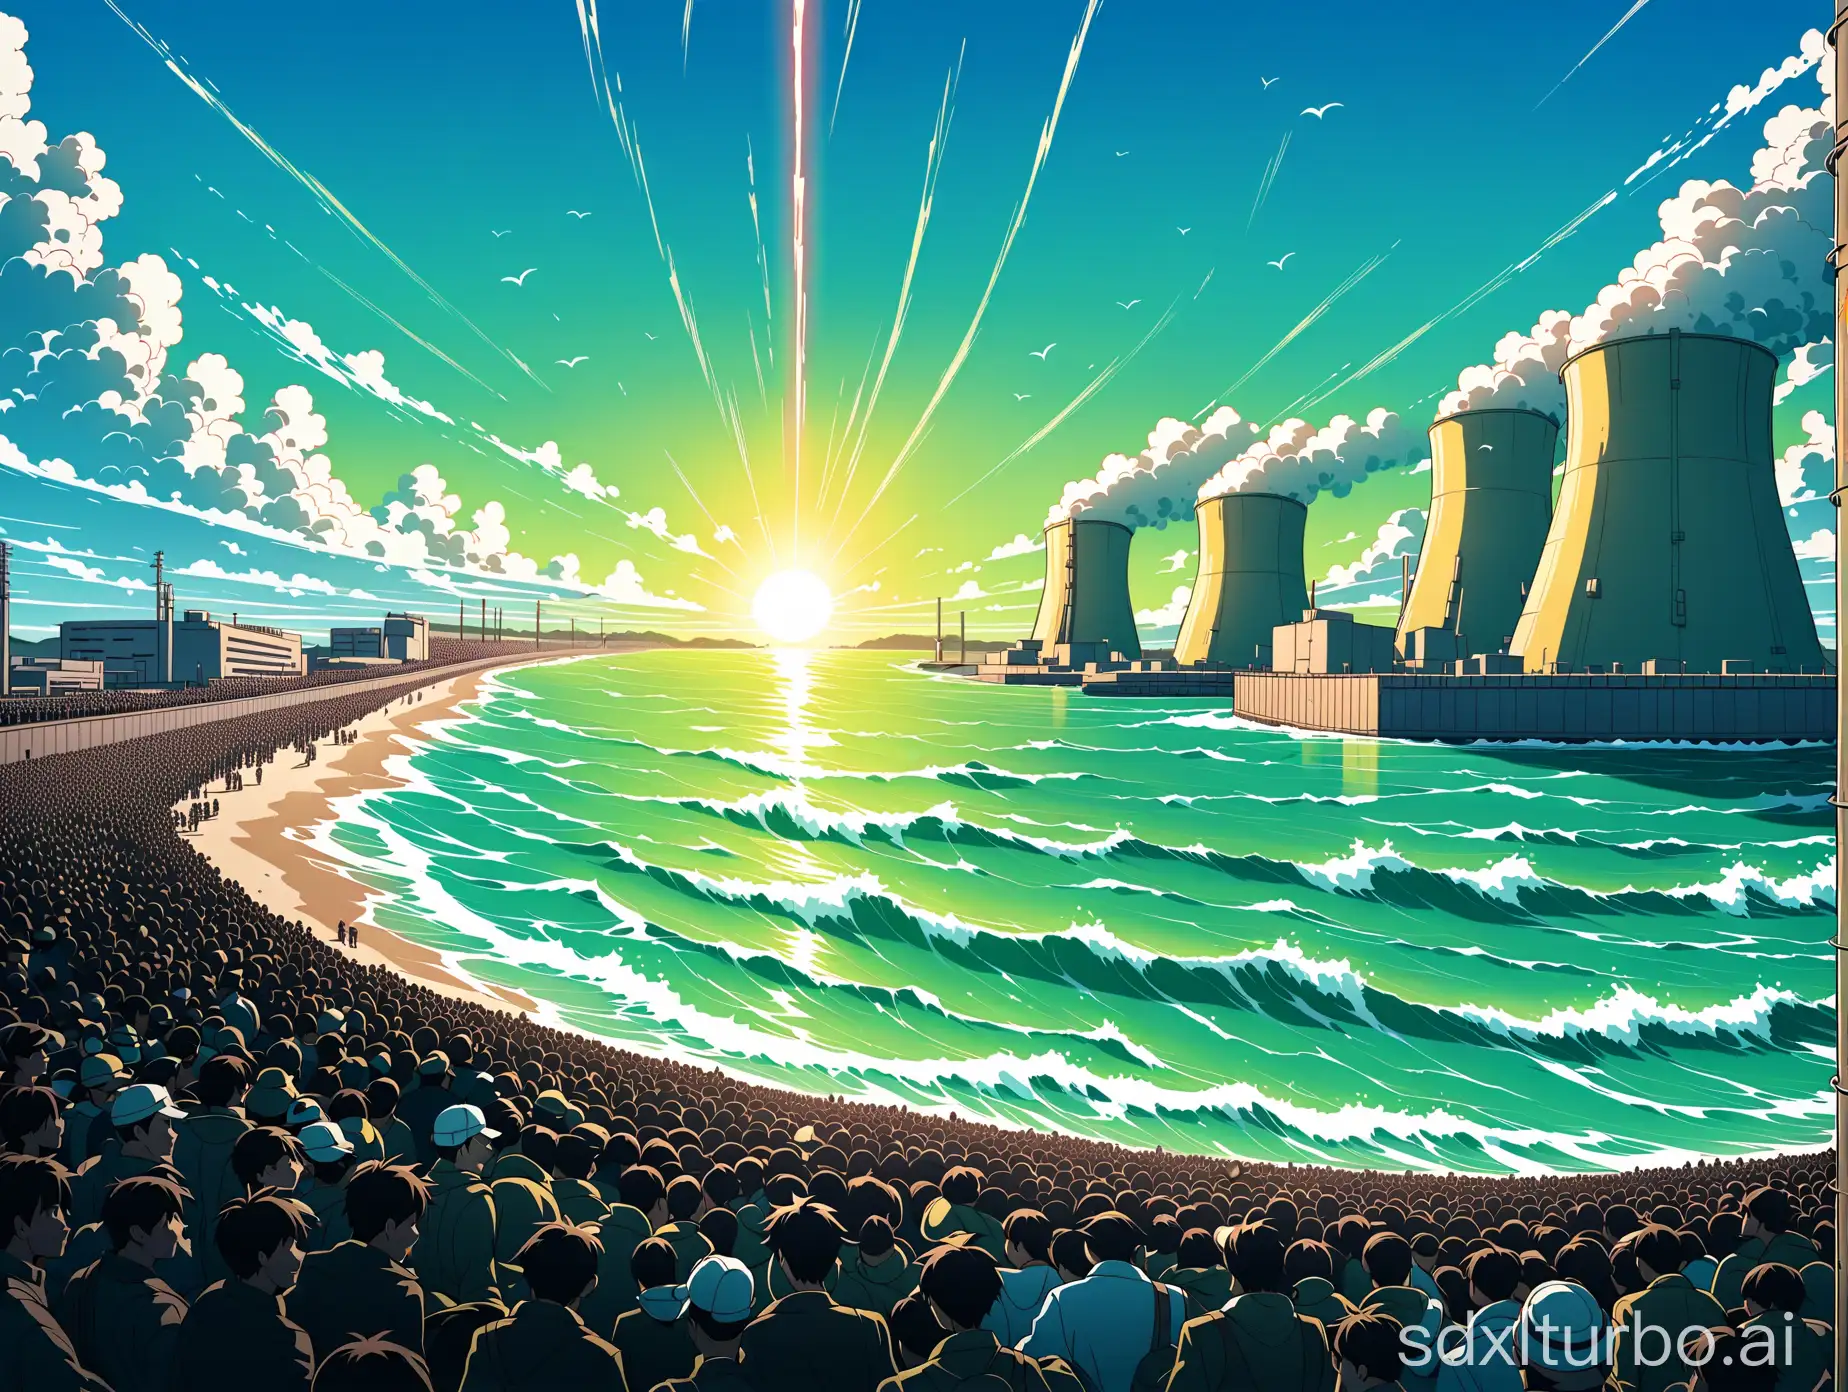 Anime style, seaside nuclear power plant, crowds scrambling to drink nuclear waste water, high-definition picture quality, 4K, original